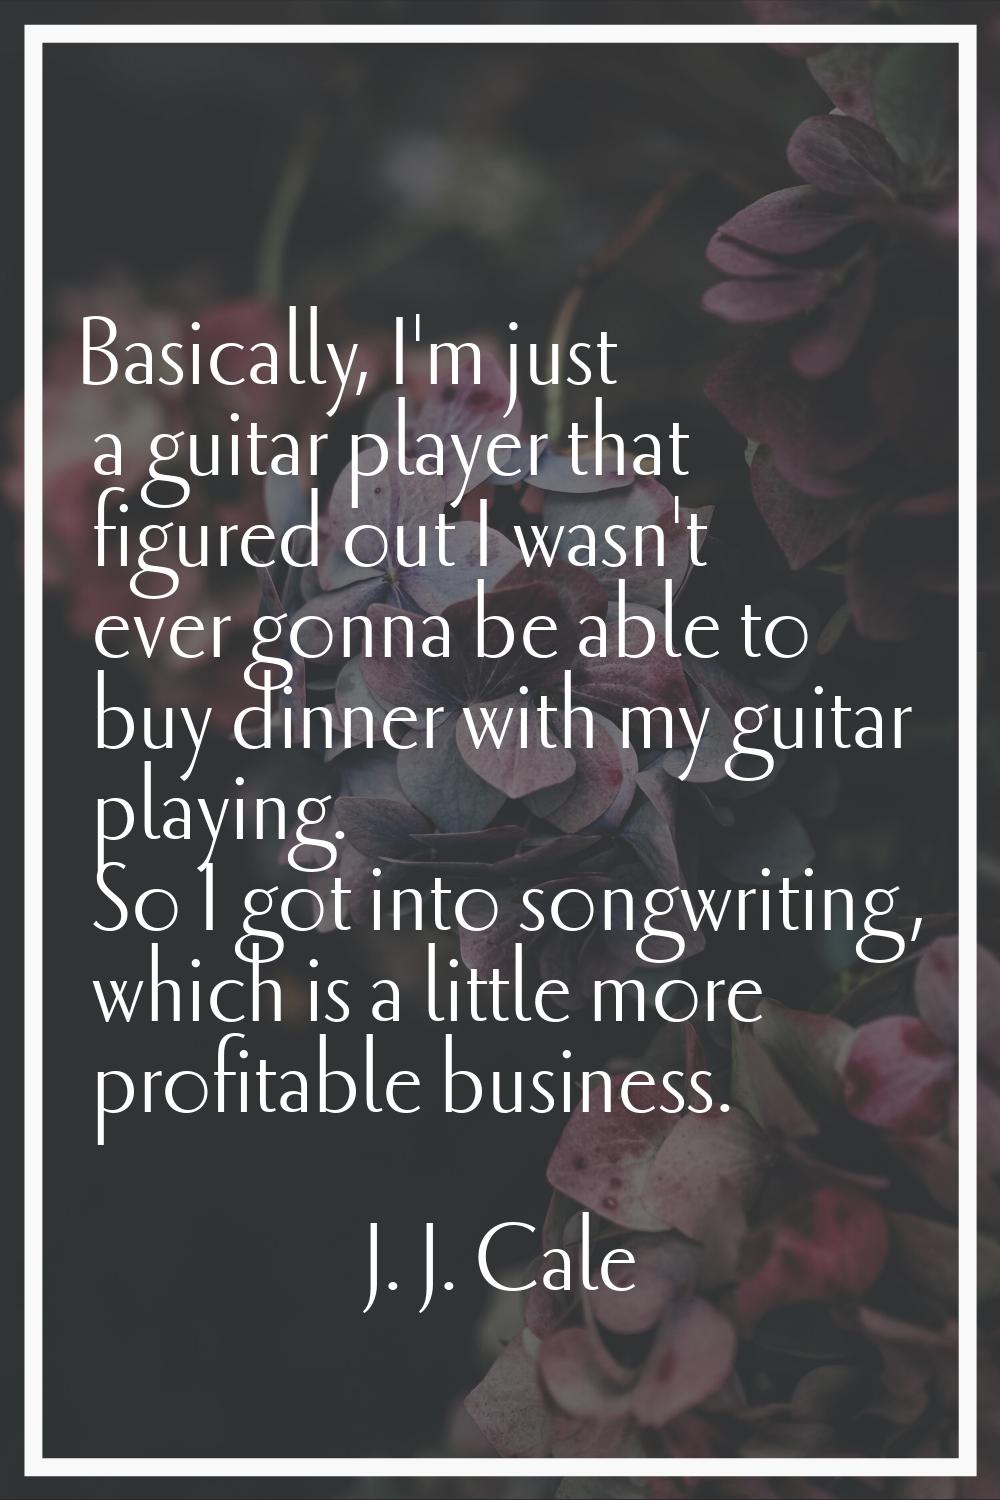 Basically, I'm just a guitar player that figured out I wasn't ever gonna be able to buy dinner with